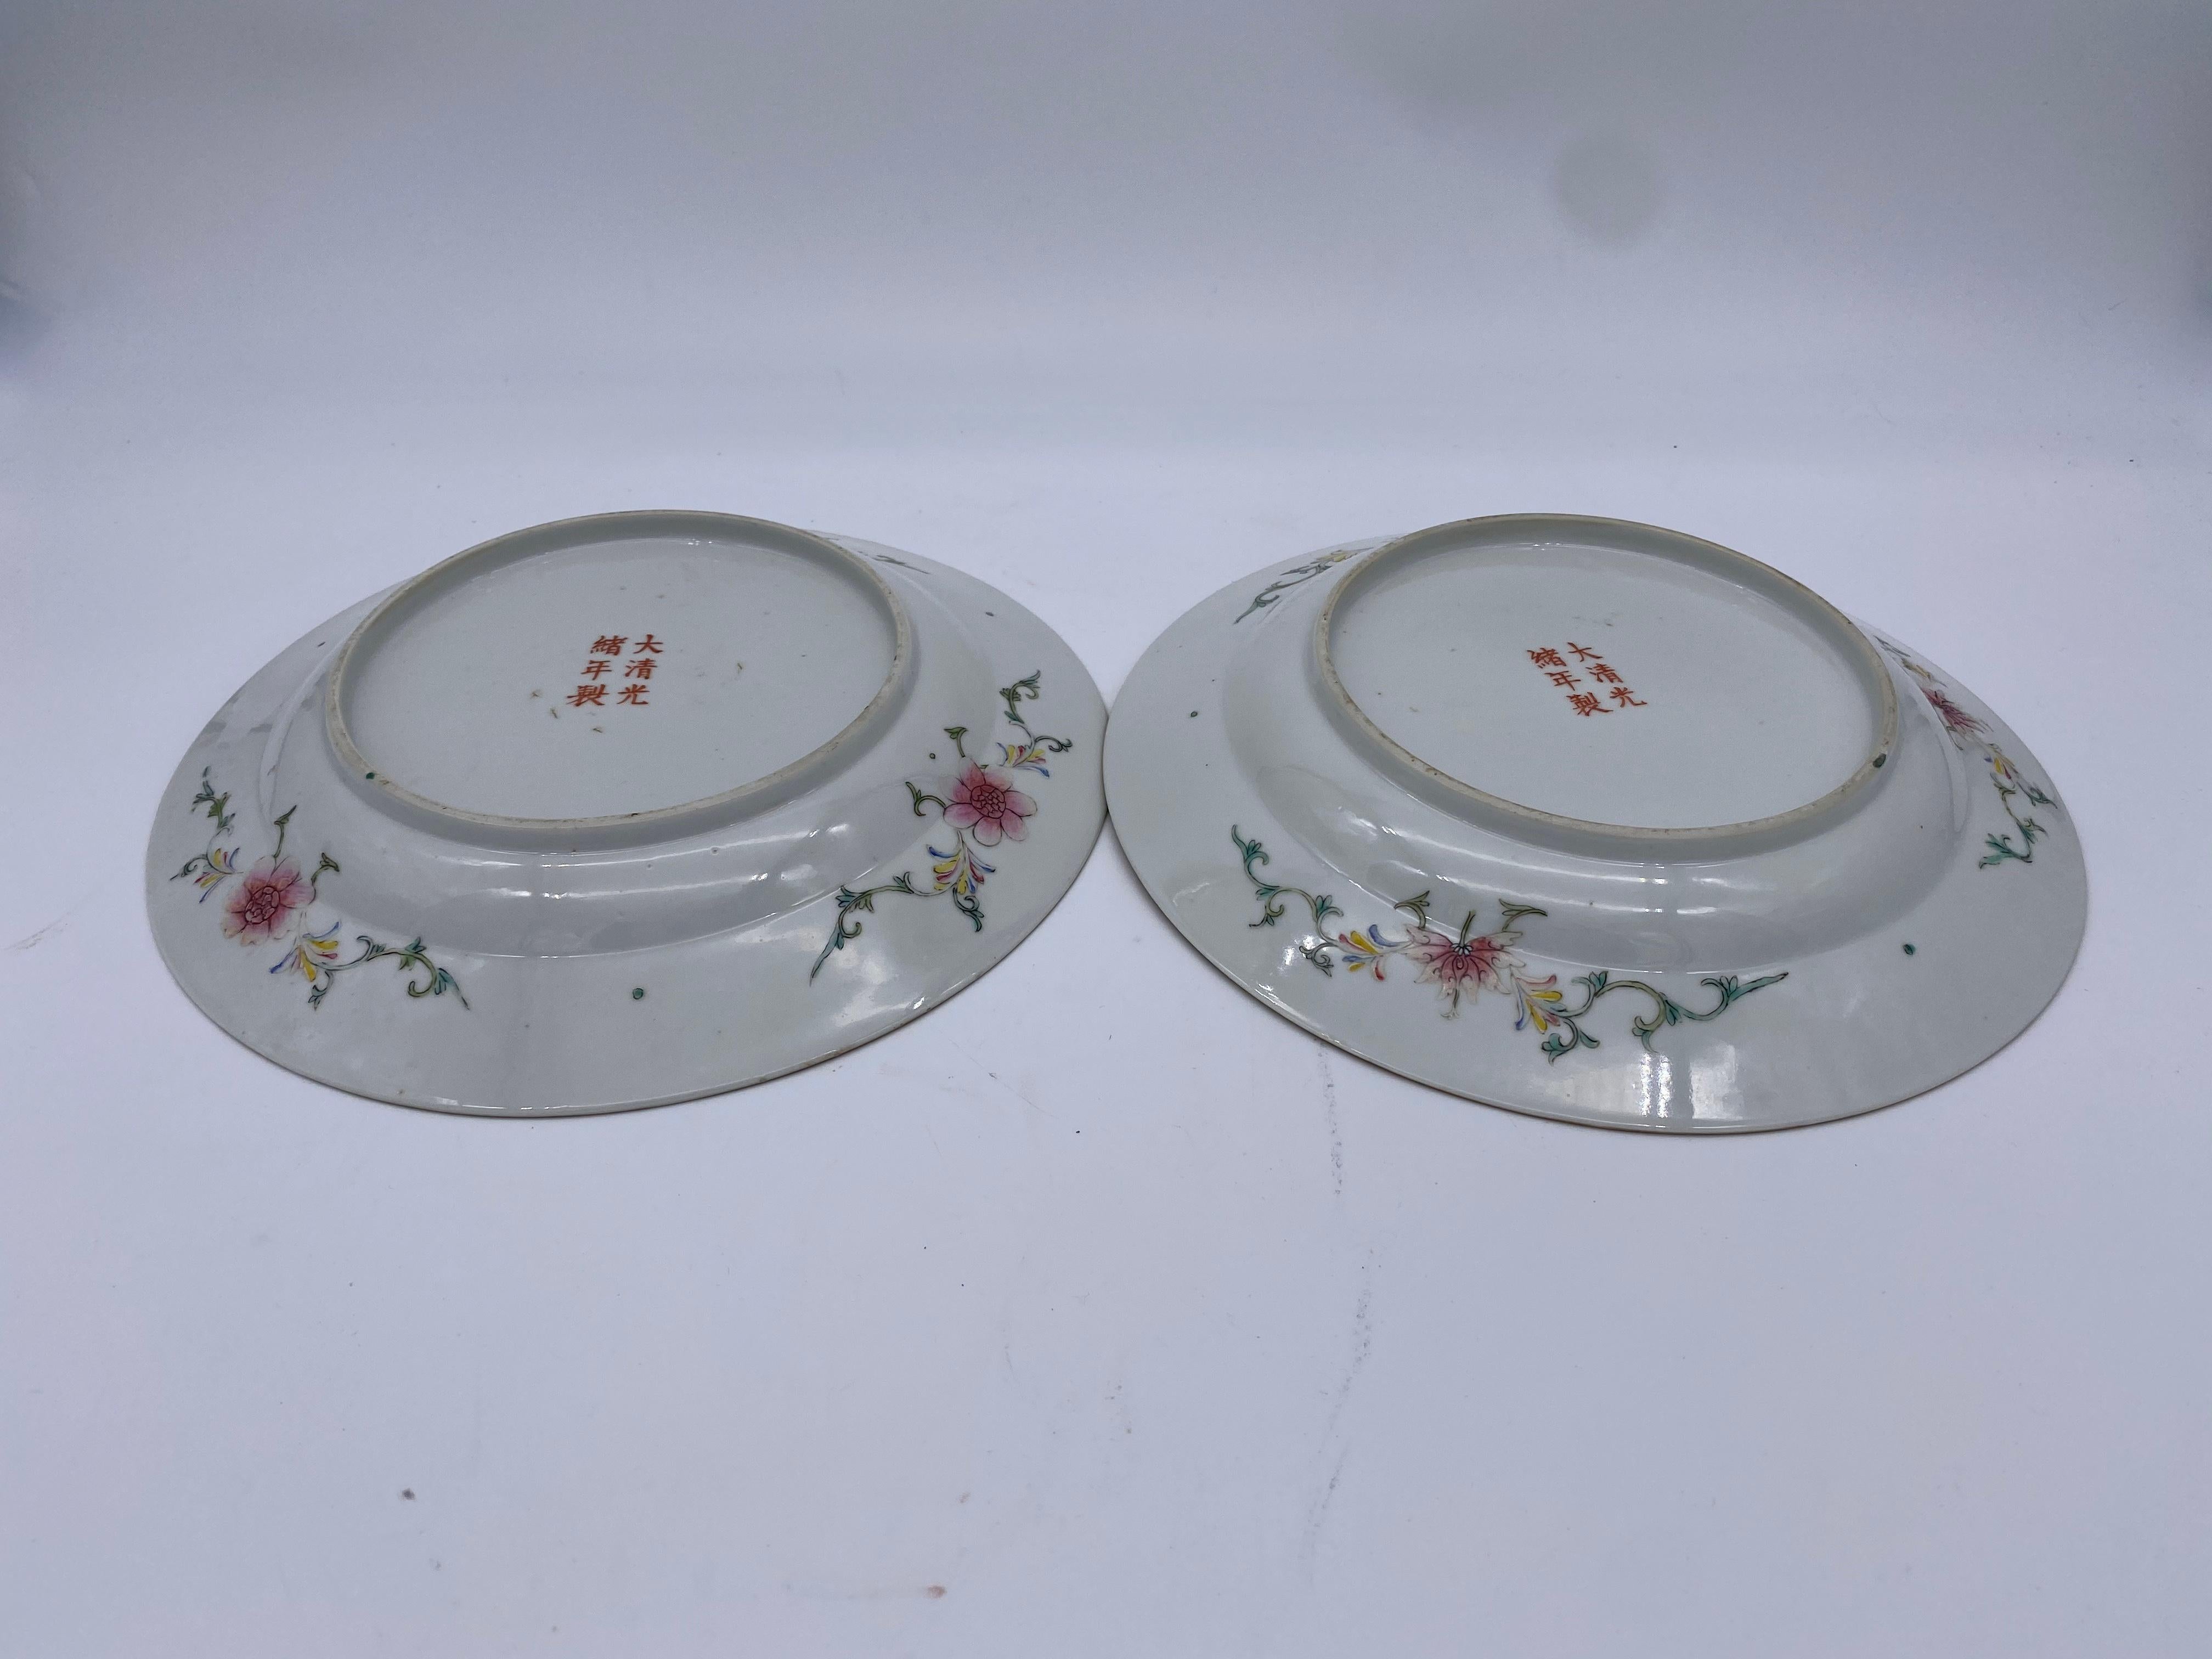 Pair of 19th Century Chinese Flower-Blossom Porcelain Plates For Sale 4